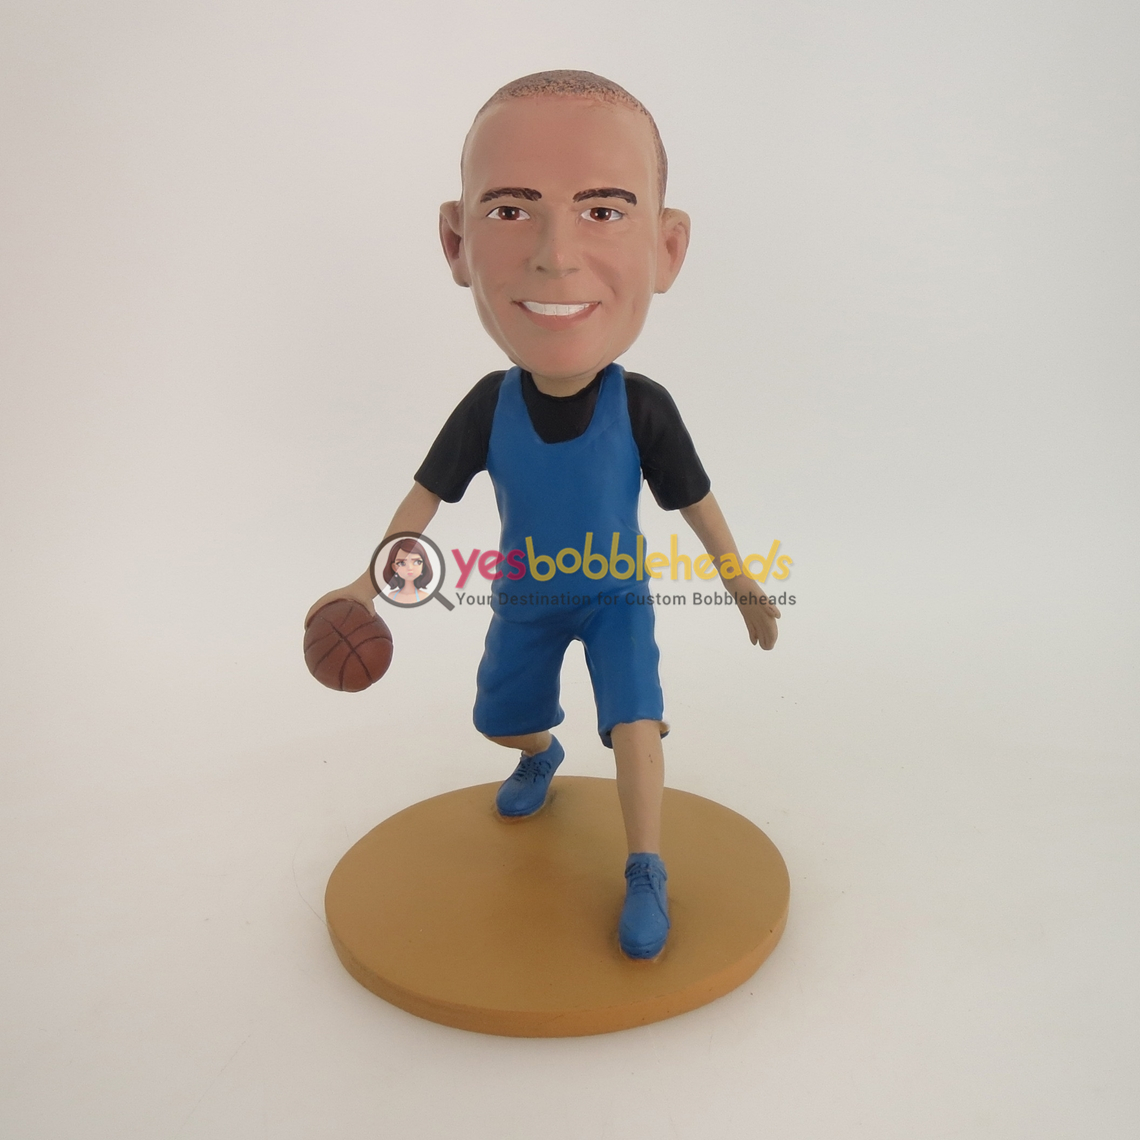 Picture of Custom Bobblehead Doll: Basketball Player